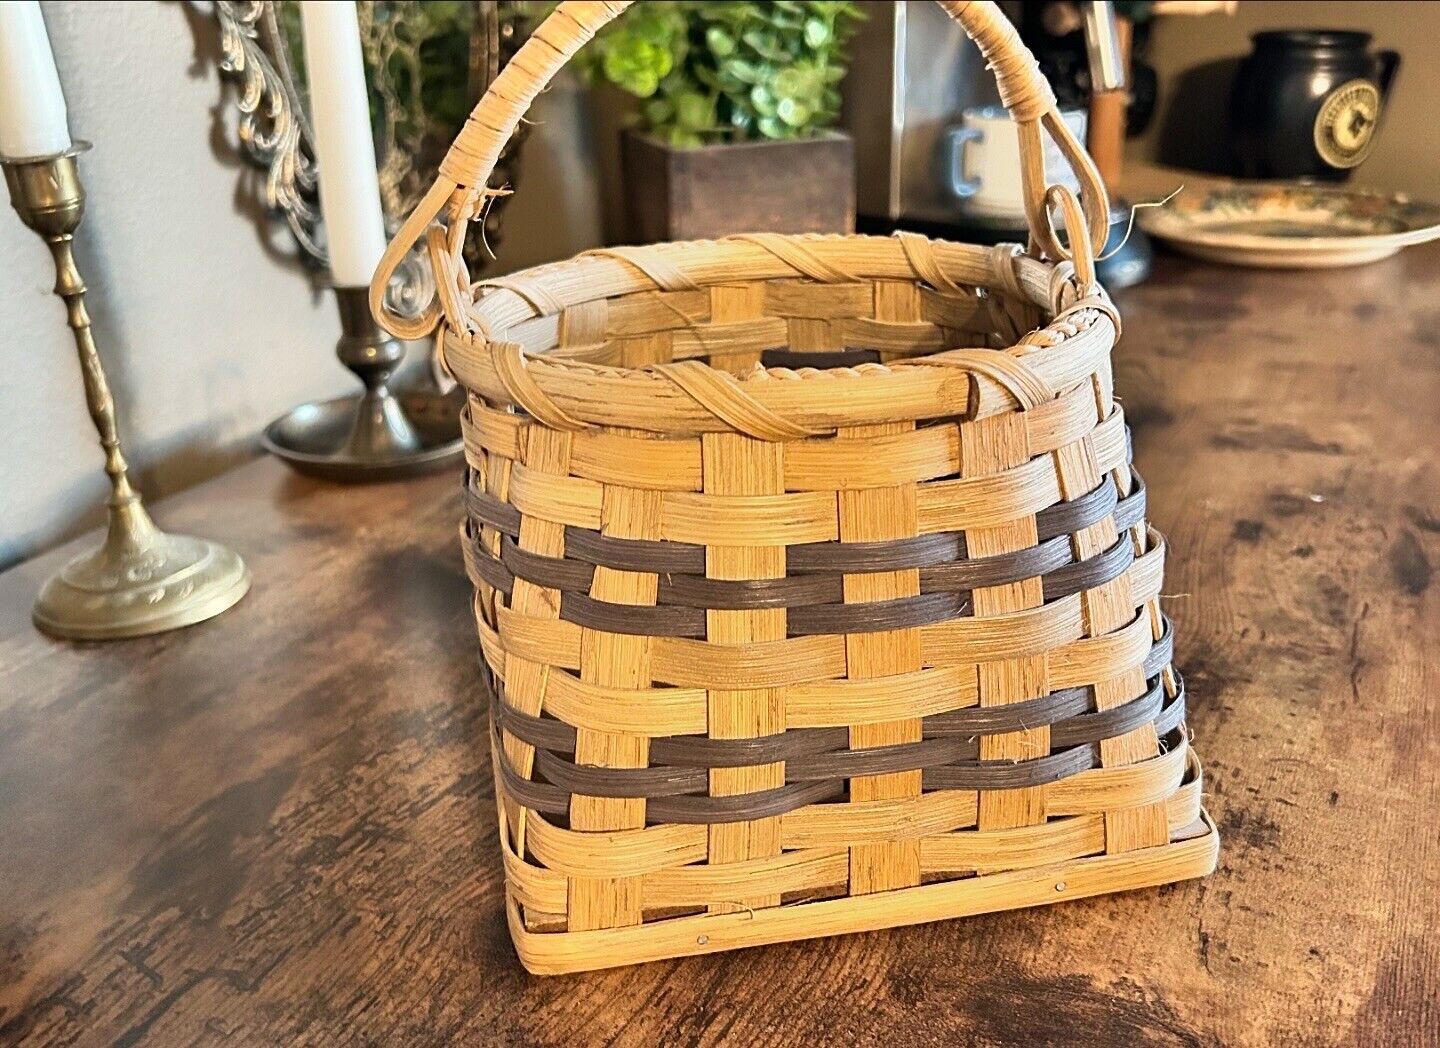 Vintage Small Amish Made Basket Handwoven Signed, Year 2000 In Apple Creek, OH